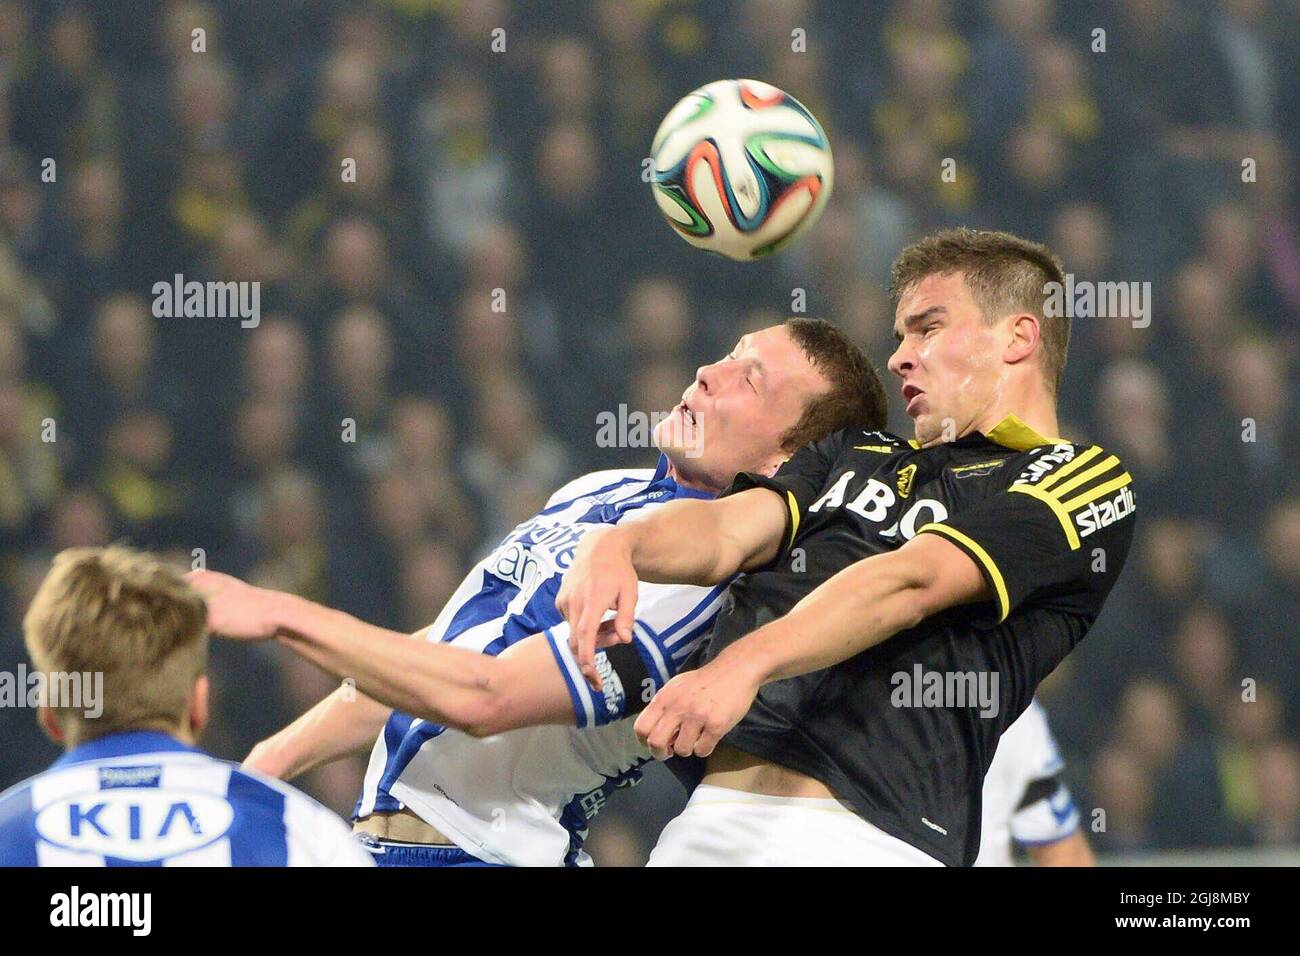 STOCKHOLM 2014-03-31 AIK:s Eero Markkanen in action in a match between AIK  och IFK Gothenburg at Friends Arena in Stockholm,Sweden March 31, 2014.  Markkanen has been transfered to Real Madrid according to